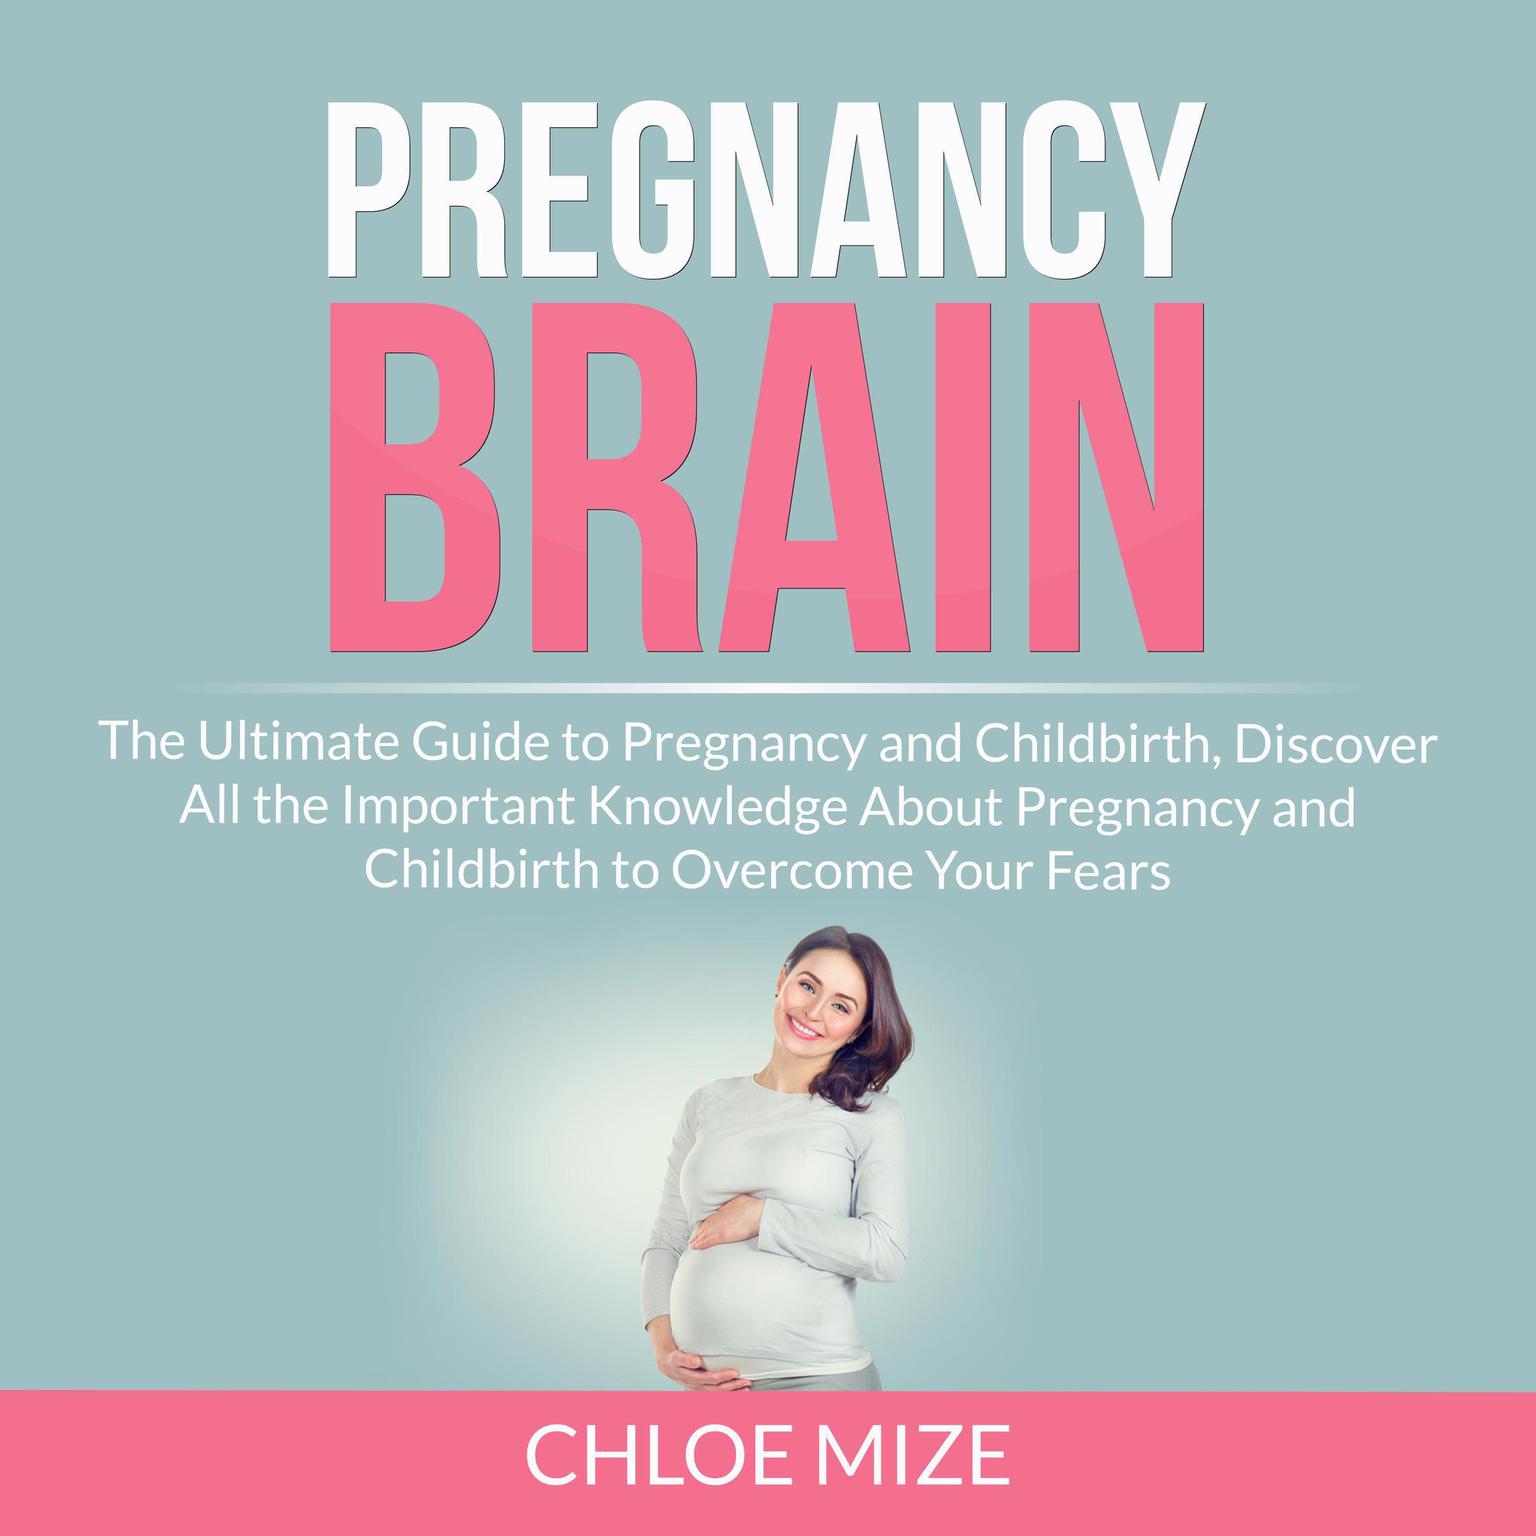 Pregnancy Brain: The Ultimate Guide to Pregnancy and Childbirth, Discover All the Important Knowledge About Pregnancy and Childbirth to Overcome Your Fears Audiobook, by Chloe Mize